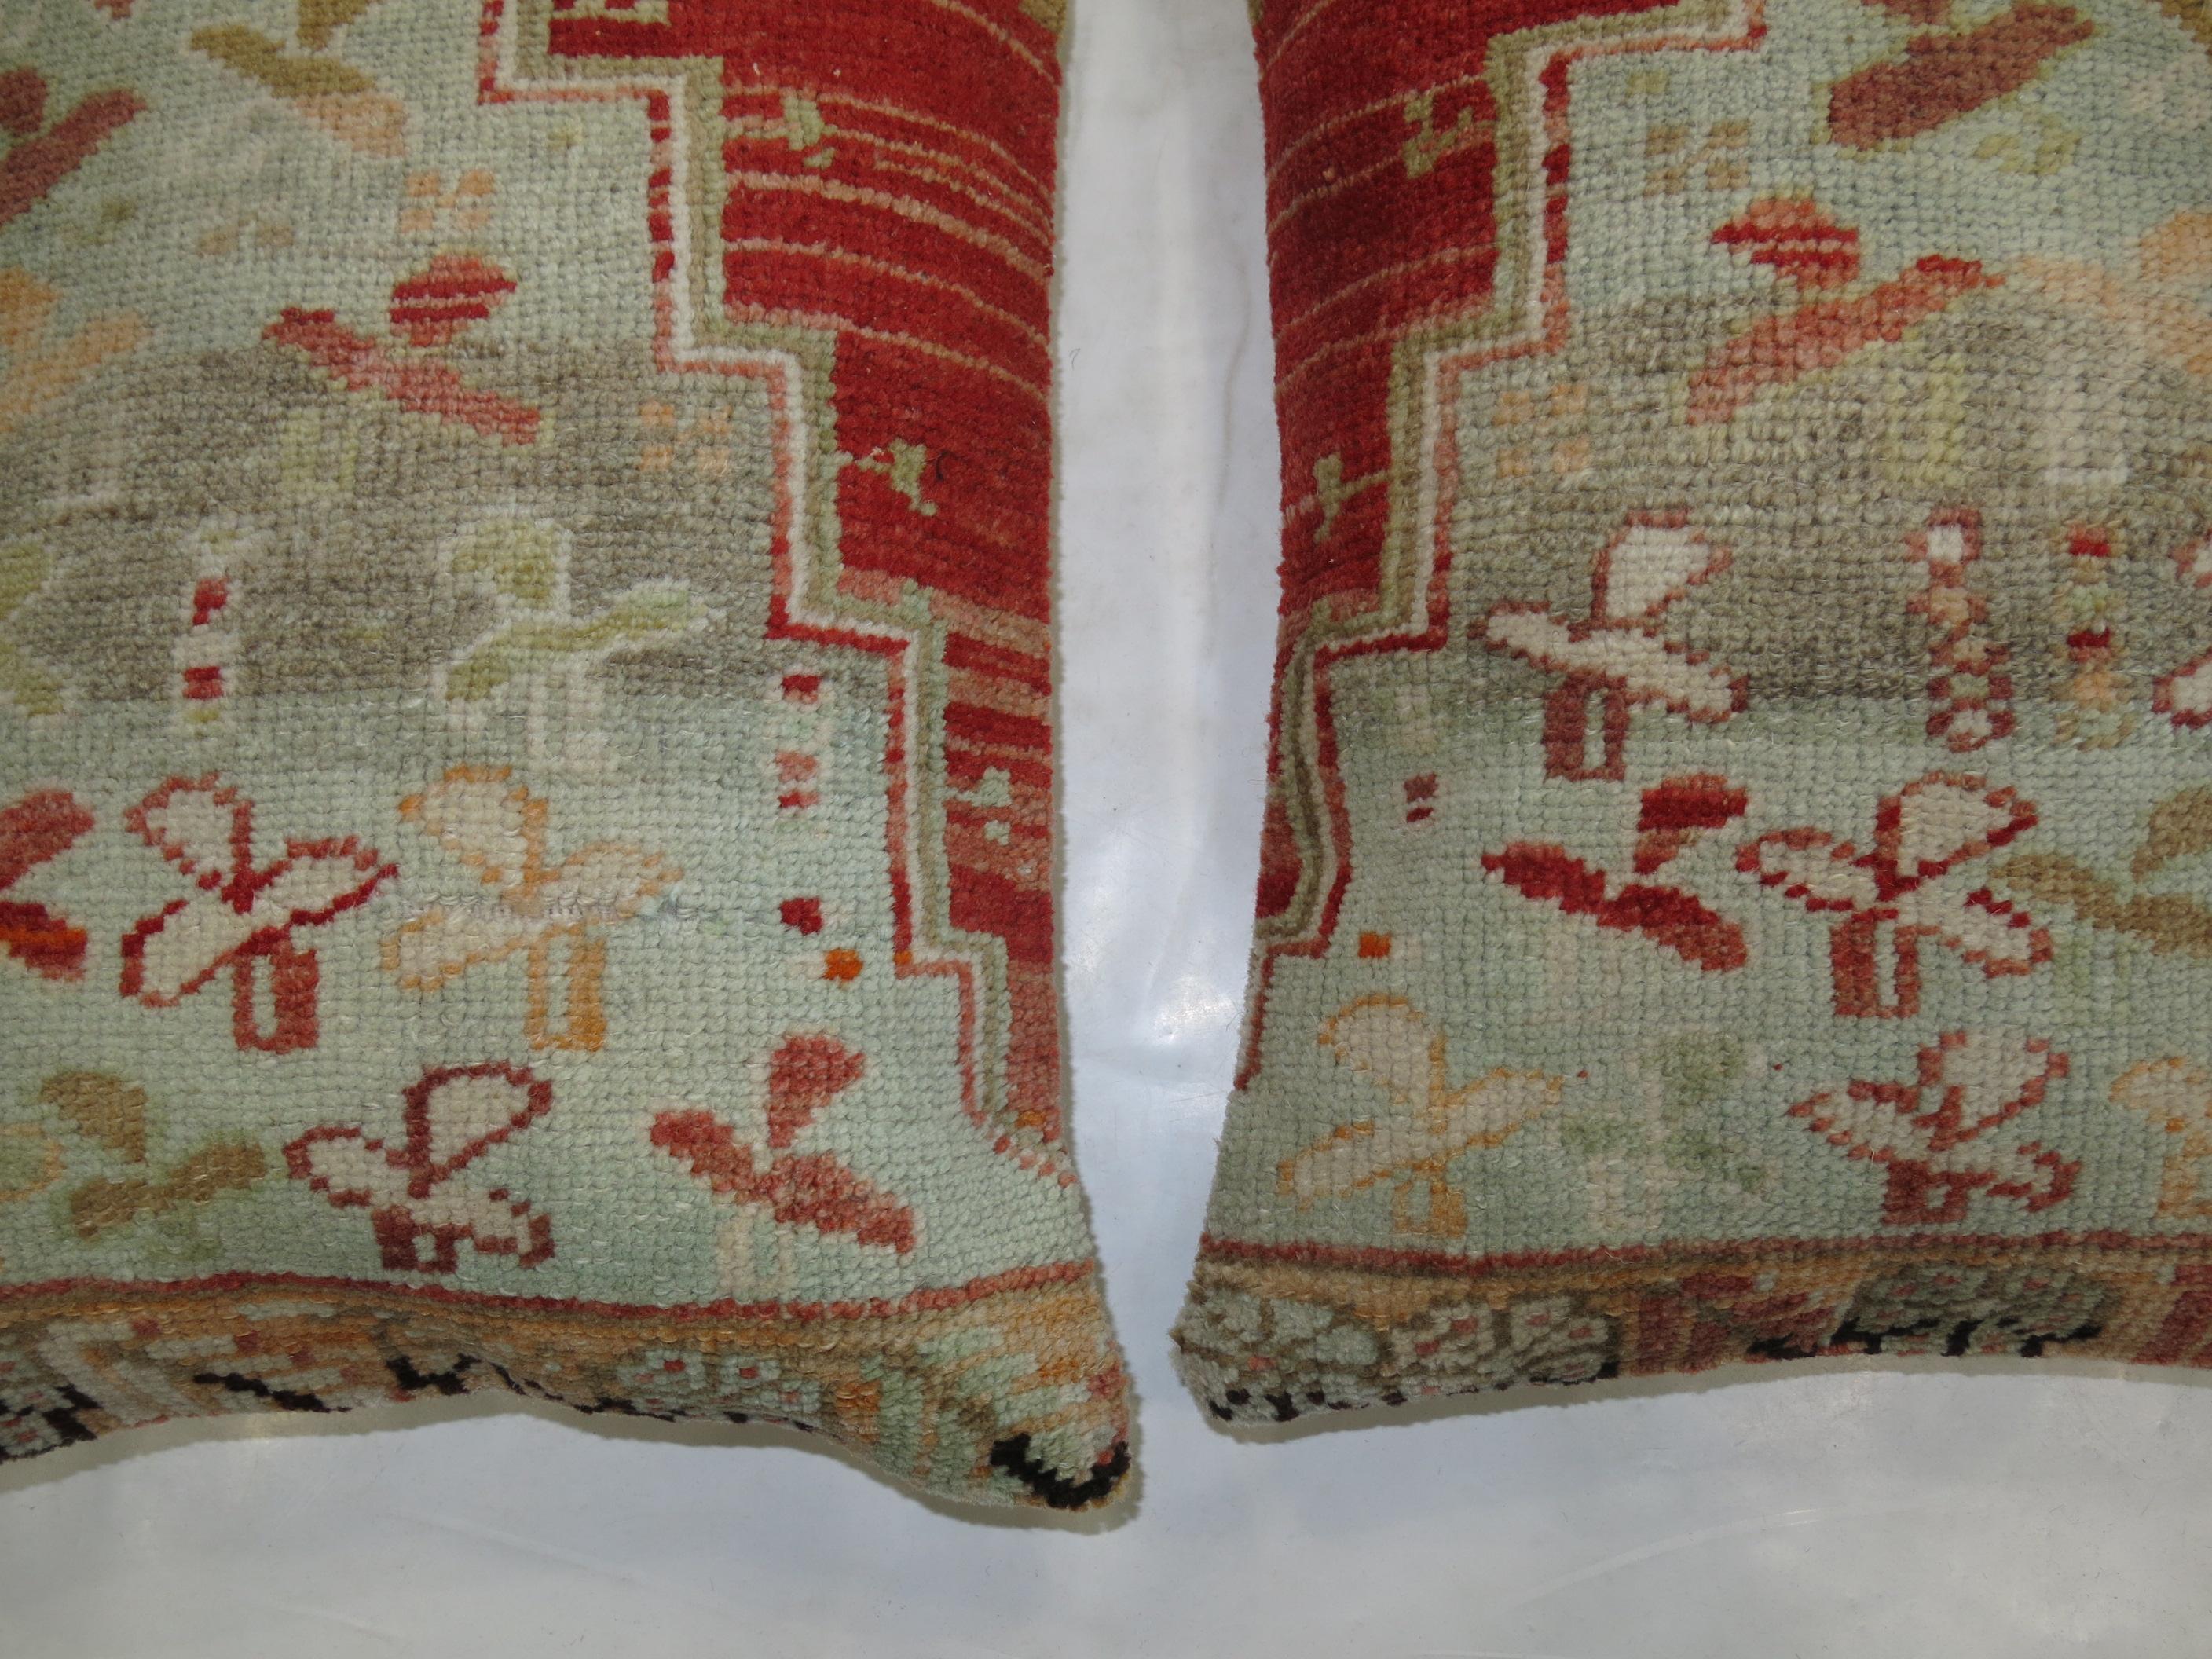 Set of pillows from a 20th century Chinese rug each measuring 13'' x 18'' and 14'' x 19''.